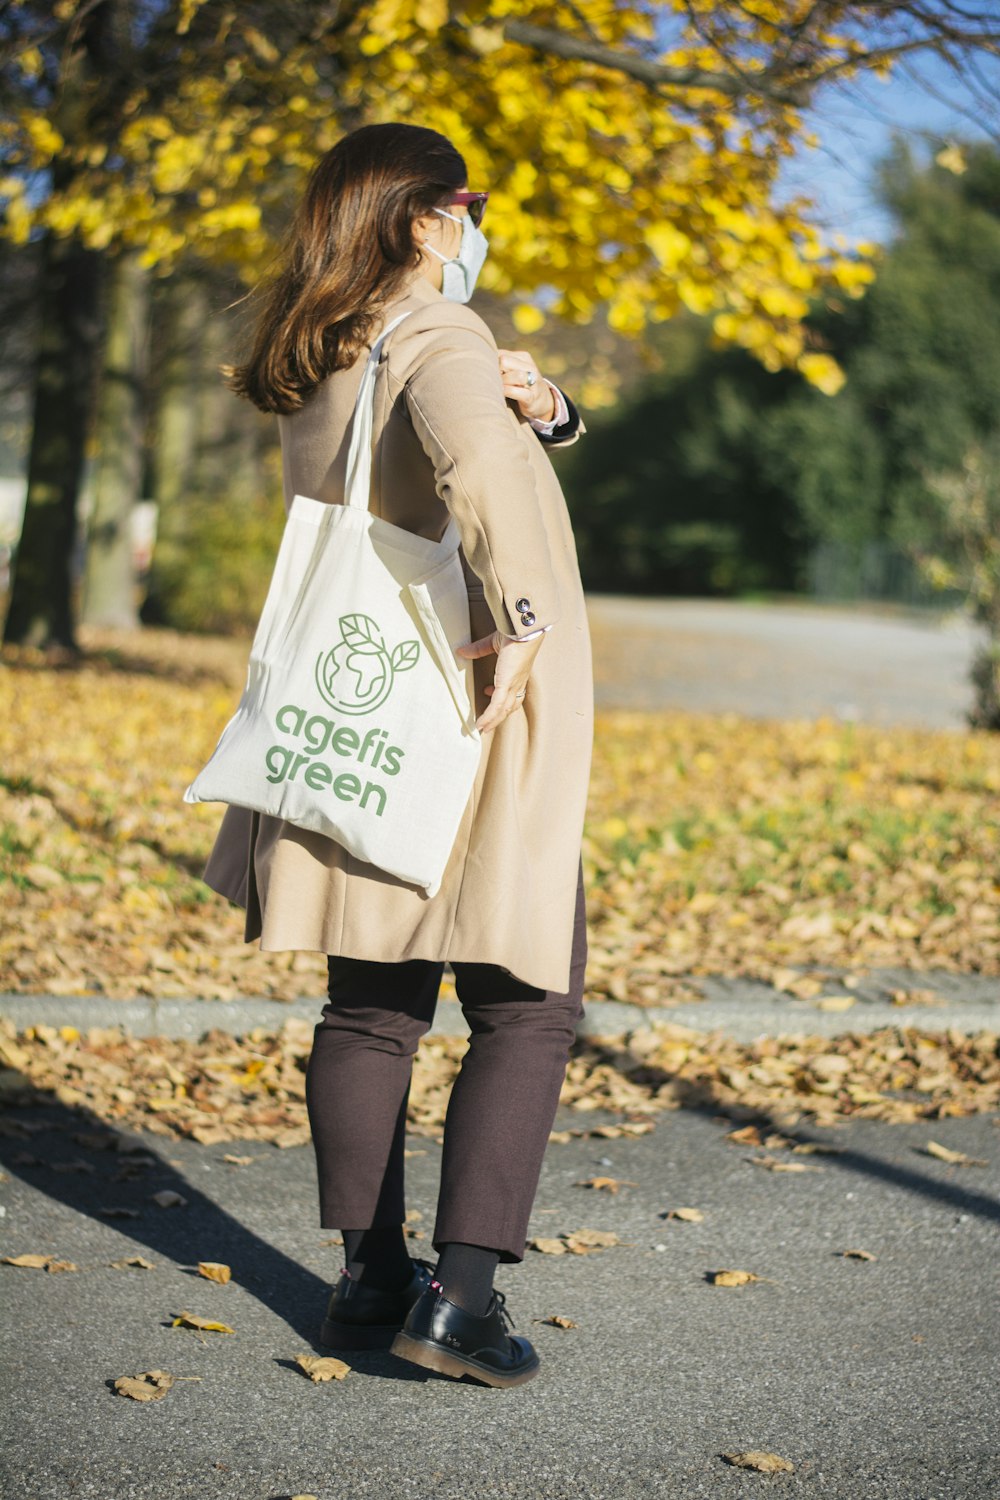 woman in beige coat and black pants carrying white tote bag